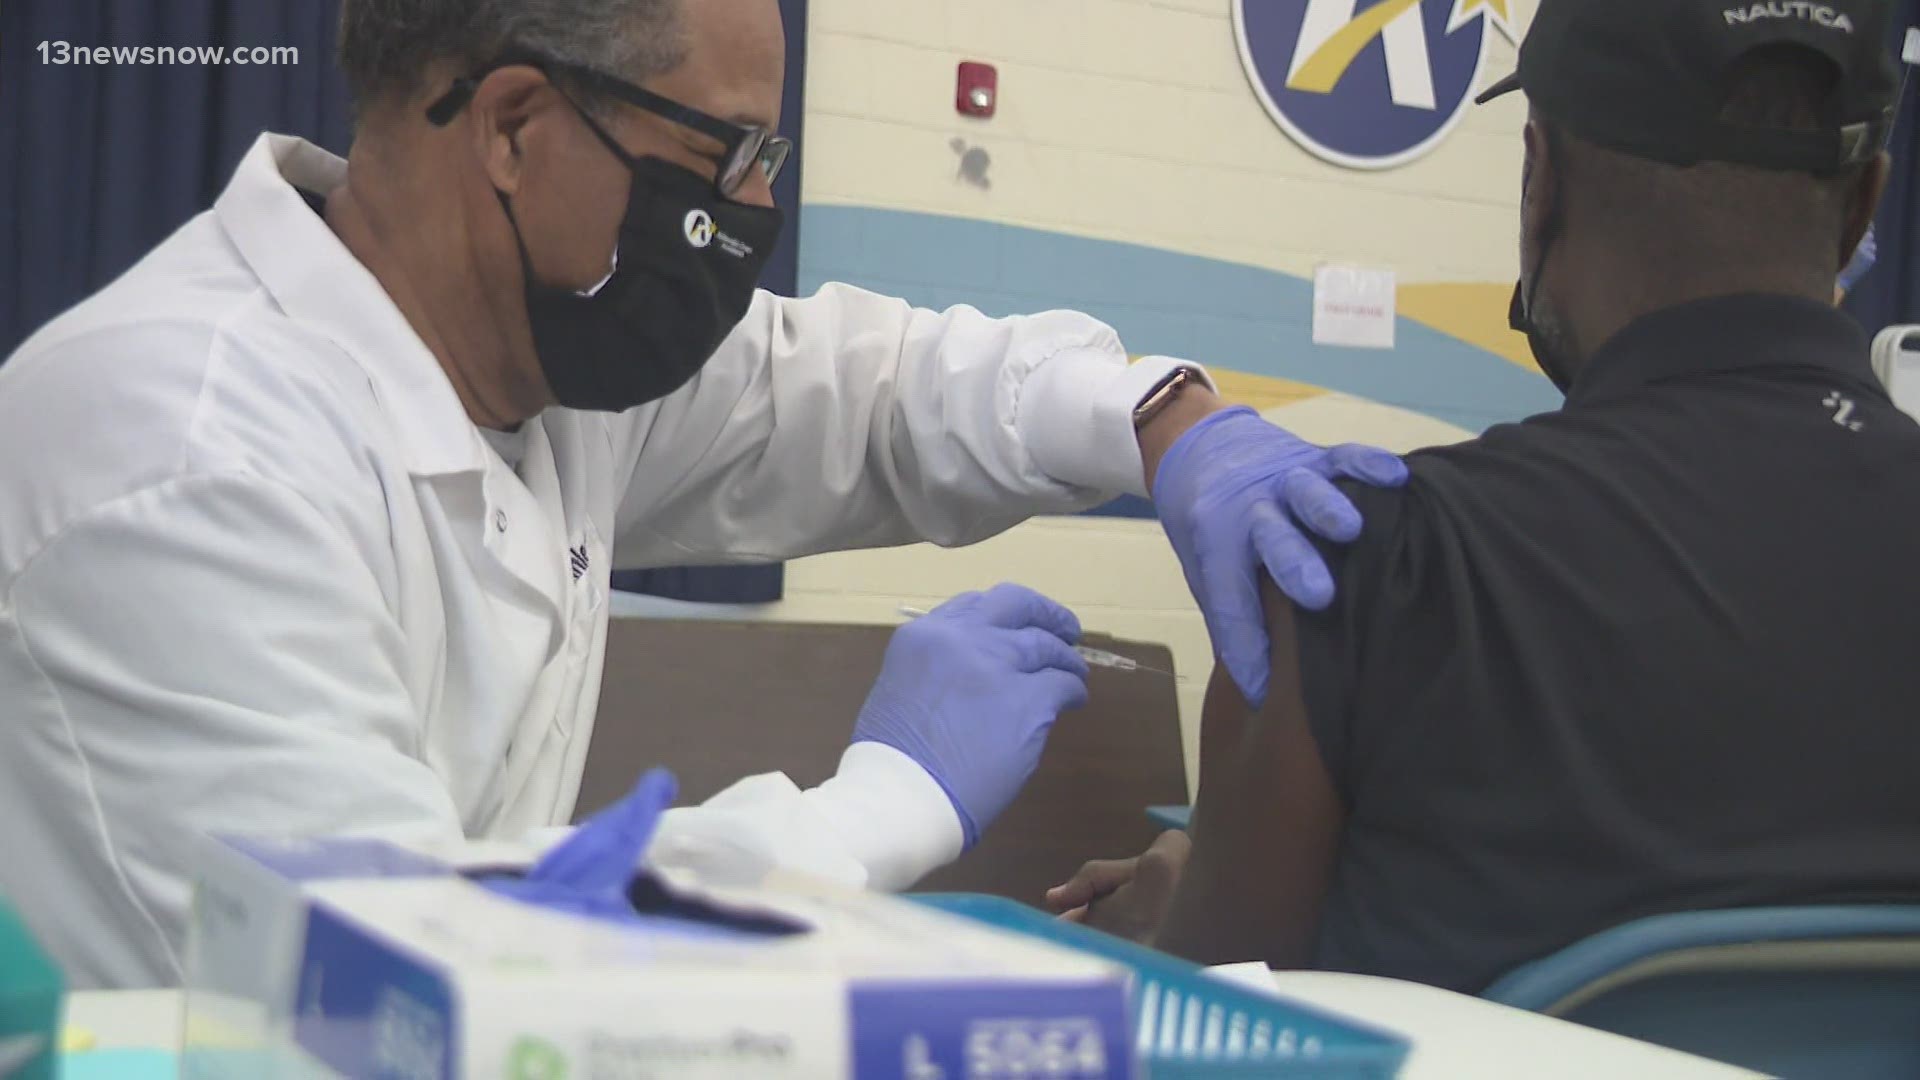 Students from Hampton University also volunteered to help administer doses of the vaccine.